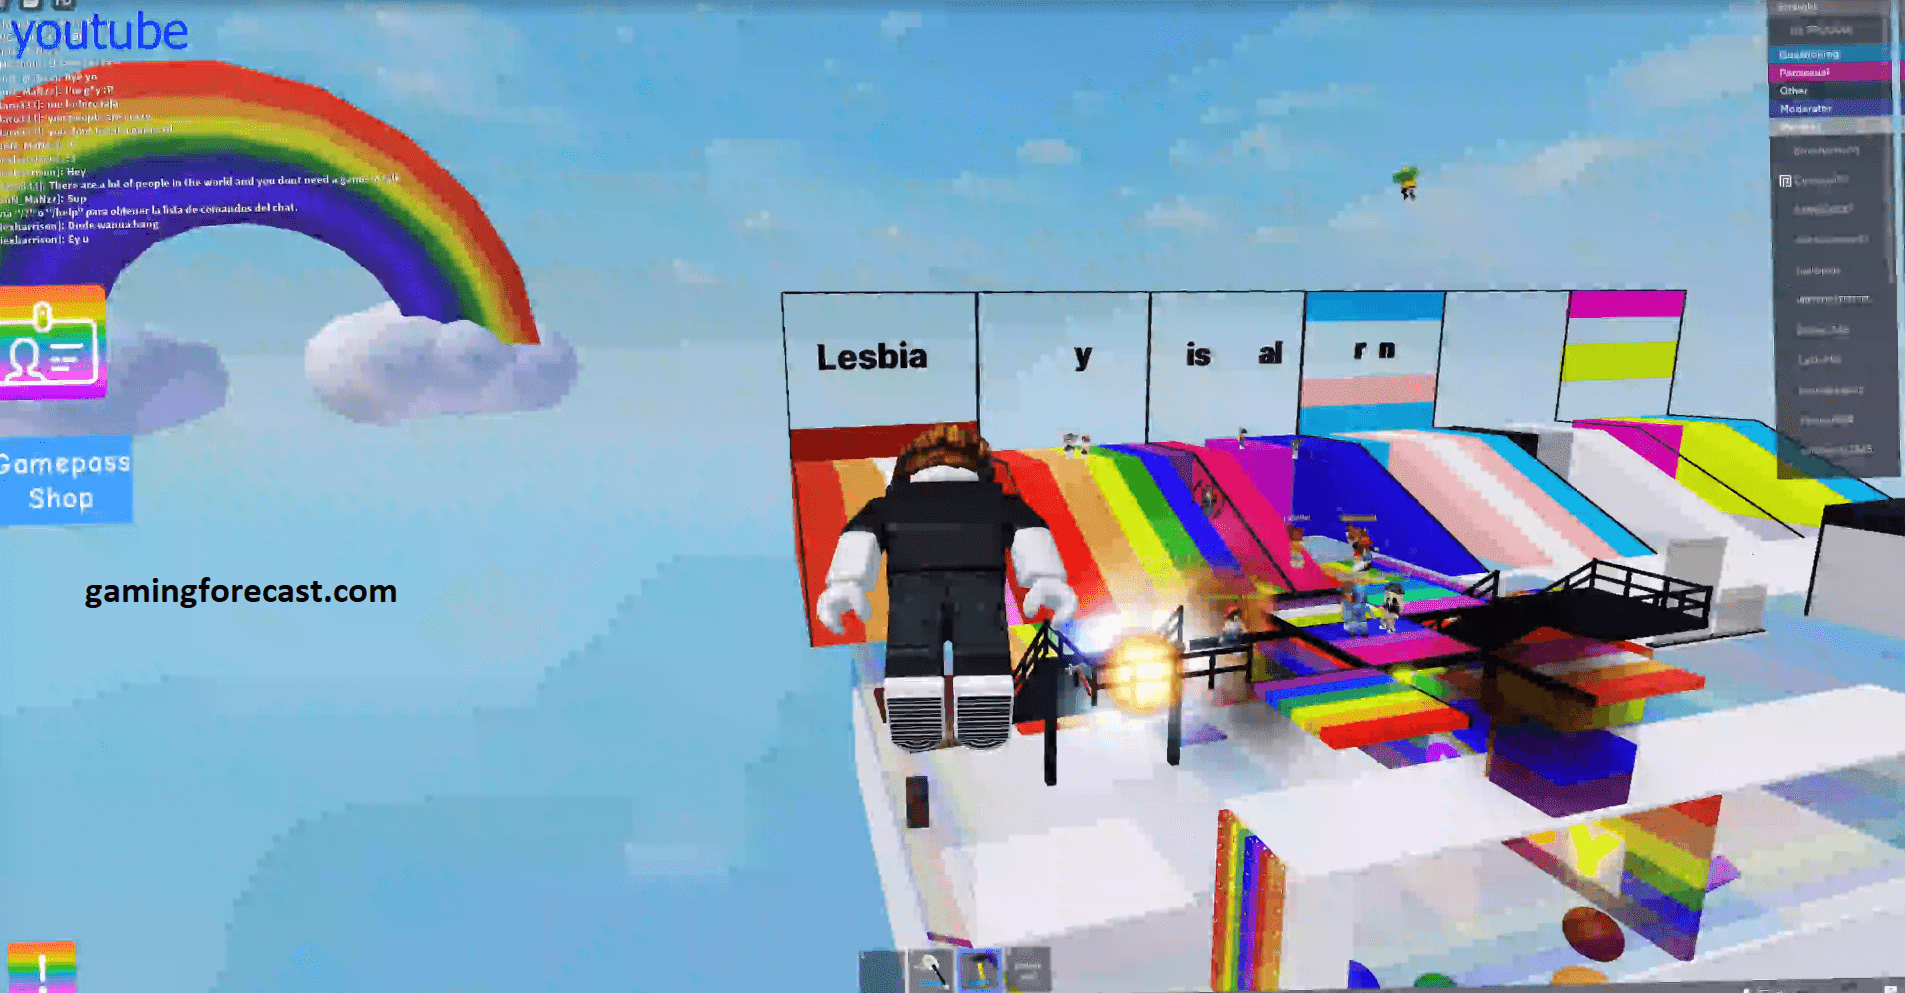 Roblox Hack Download Pc Destroy Lobby Fly Aimbot Scripts 2021 Gaming Forecast Download Free Online Game Hacks - can you get banned for hacking in roblox